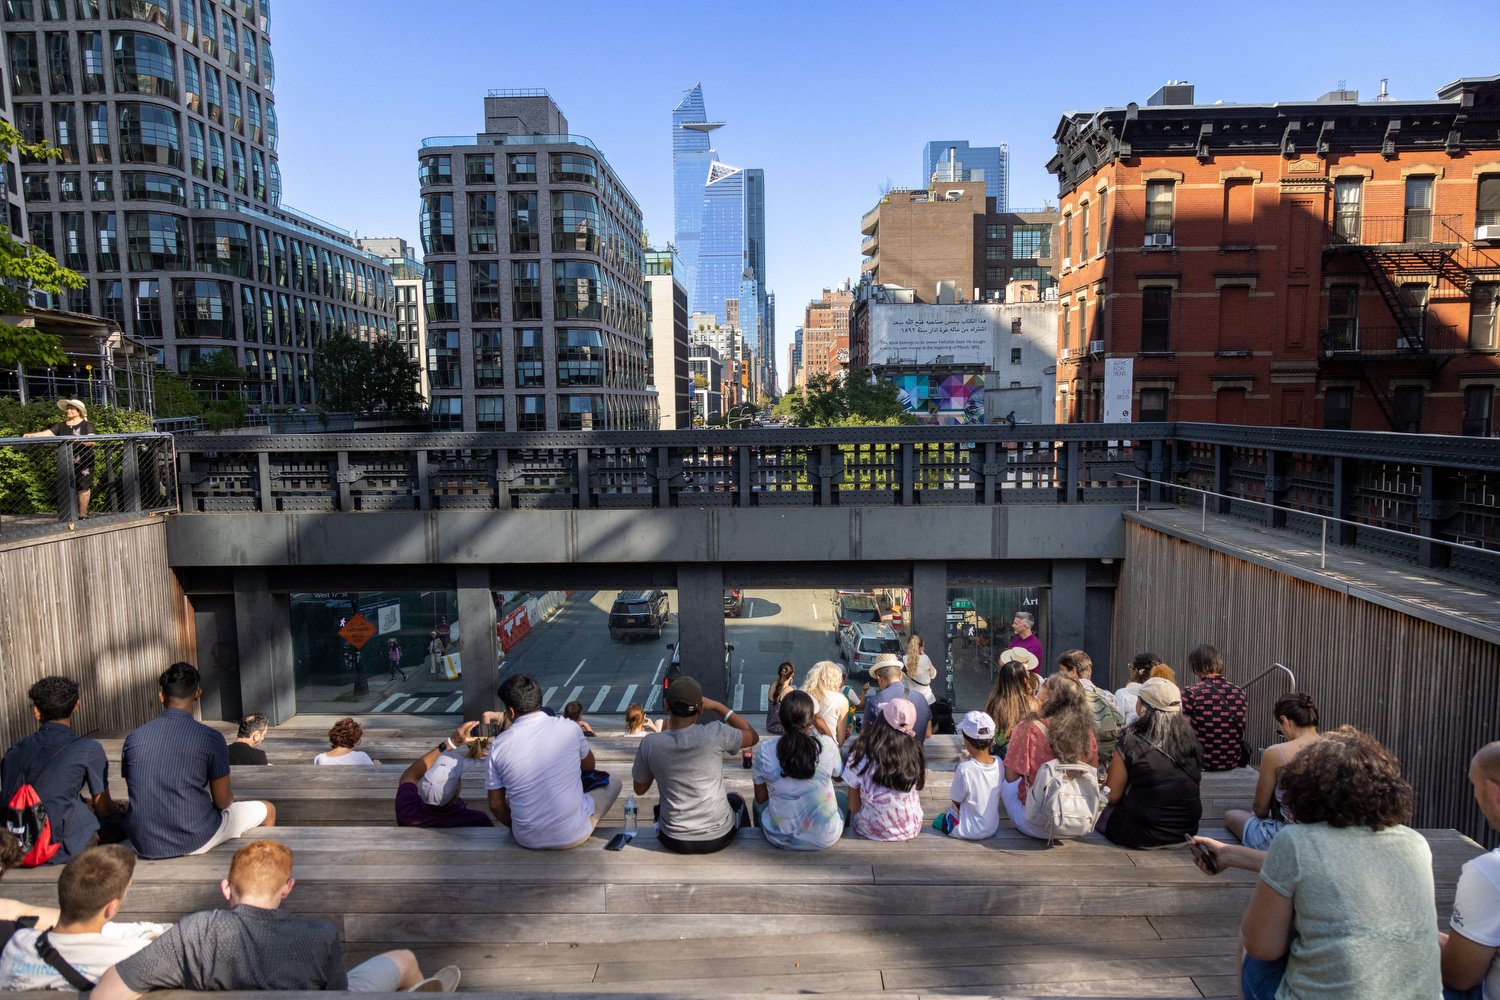 A unique place to sit on the Highline